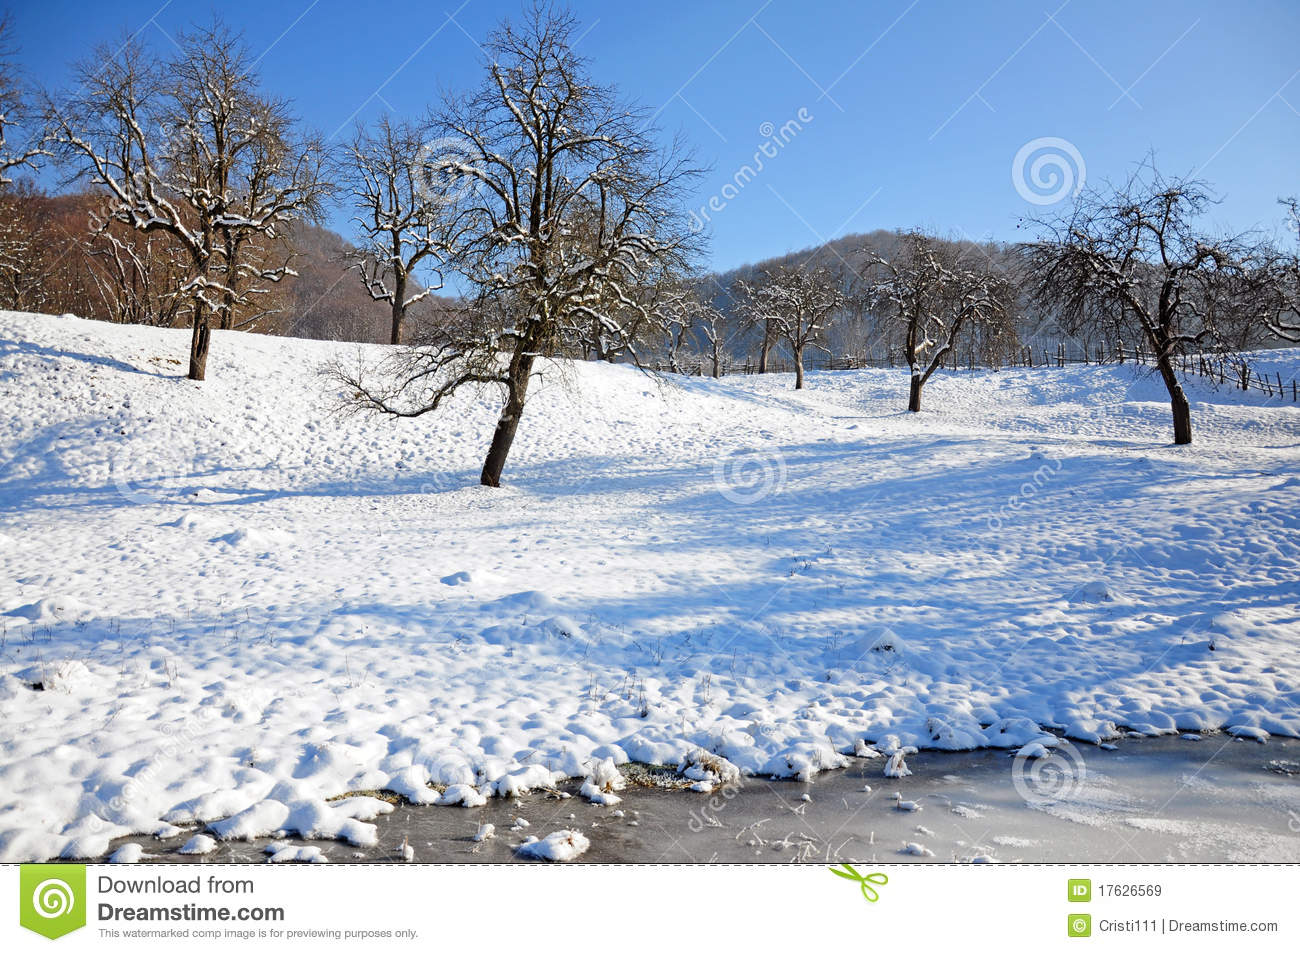 Shadows On Snowy Orchard Royalty Free Stock Images   Image  17626569